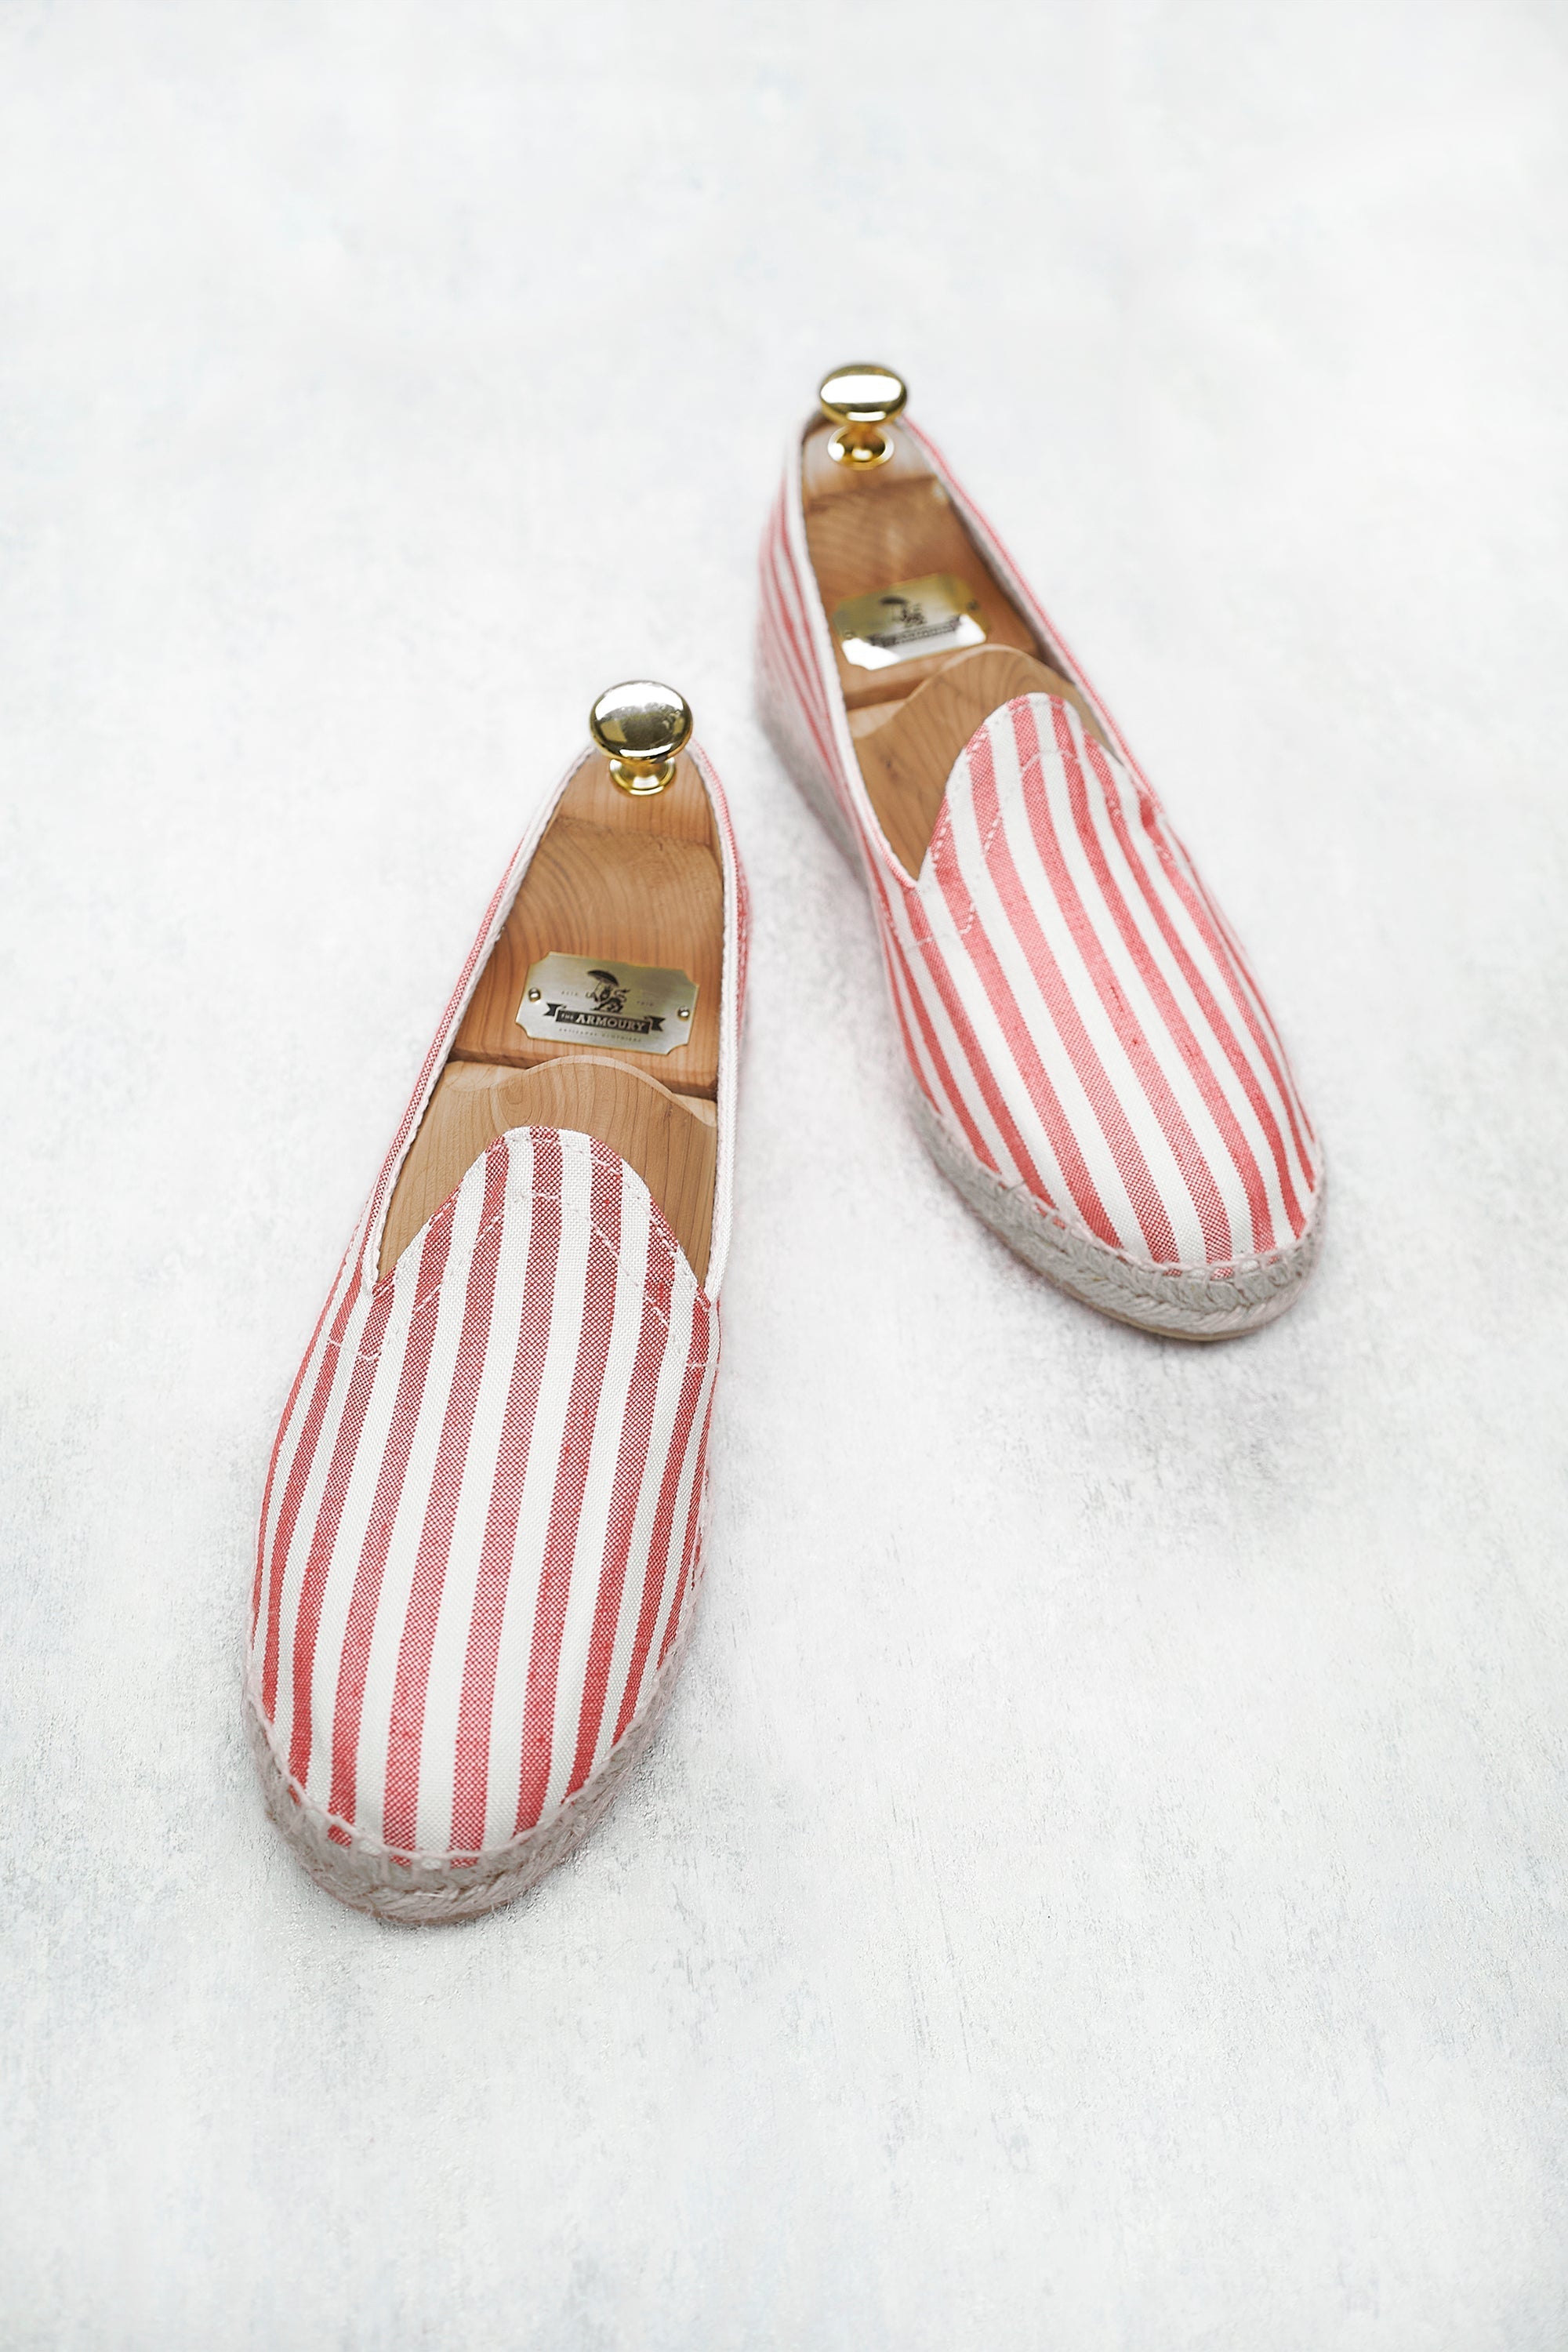 Drake's Red and White Stripe Canvas Espadrilles